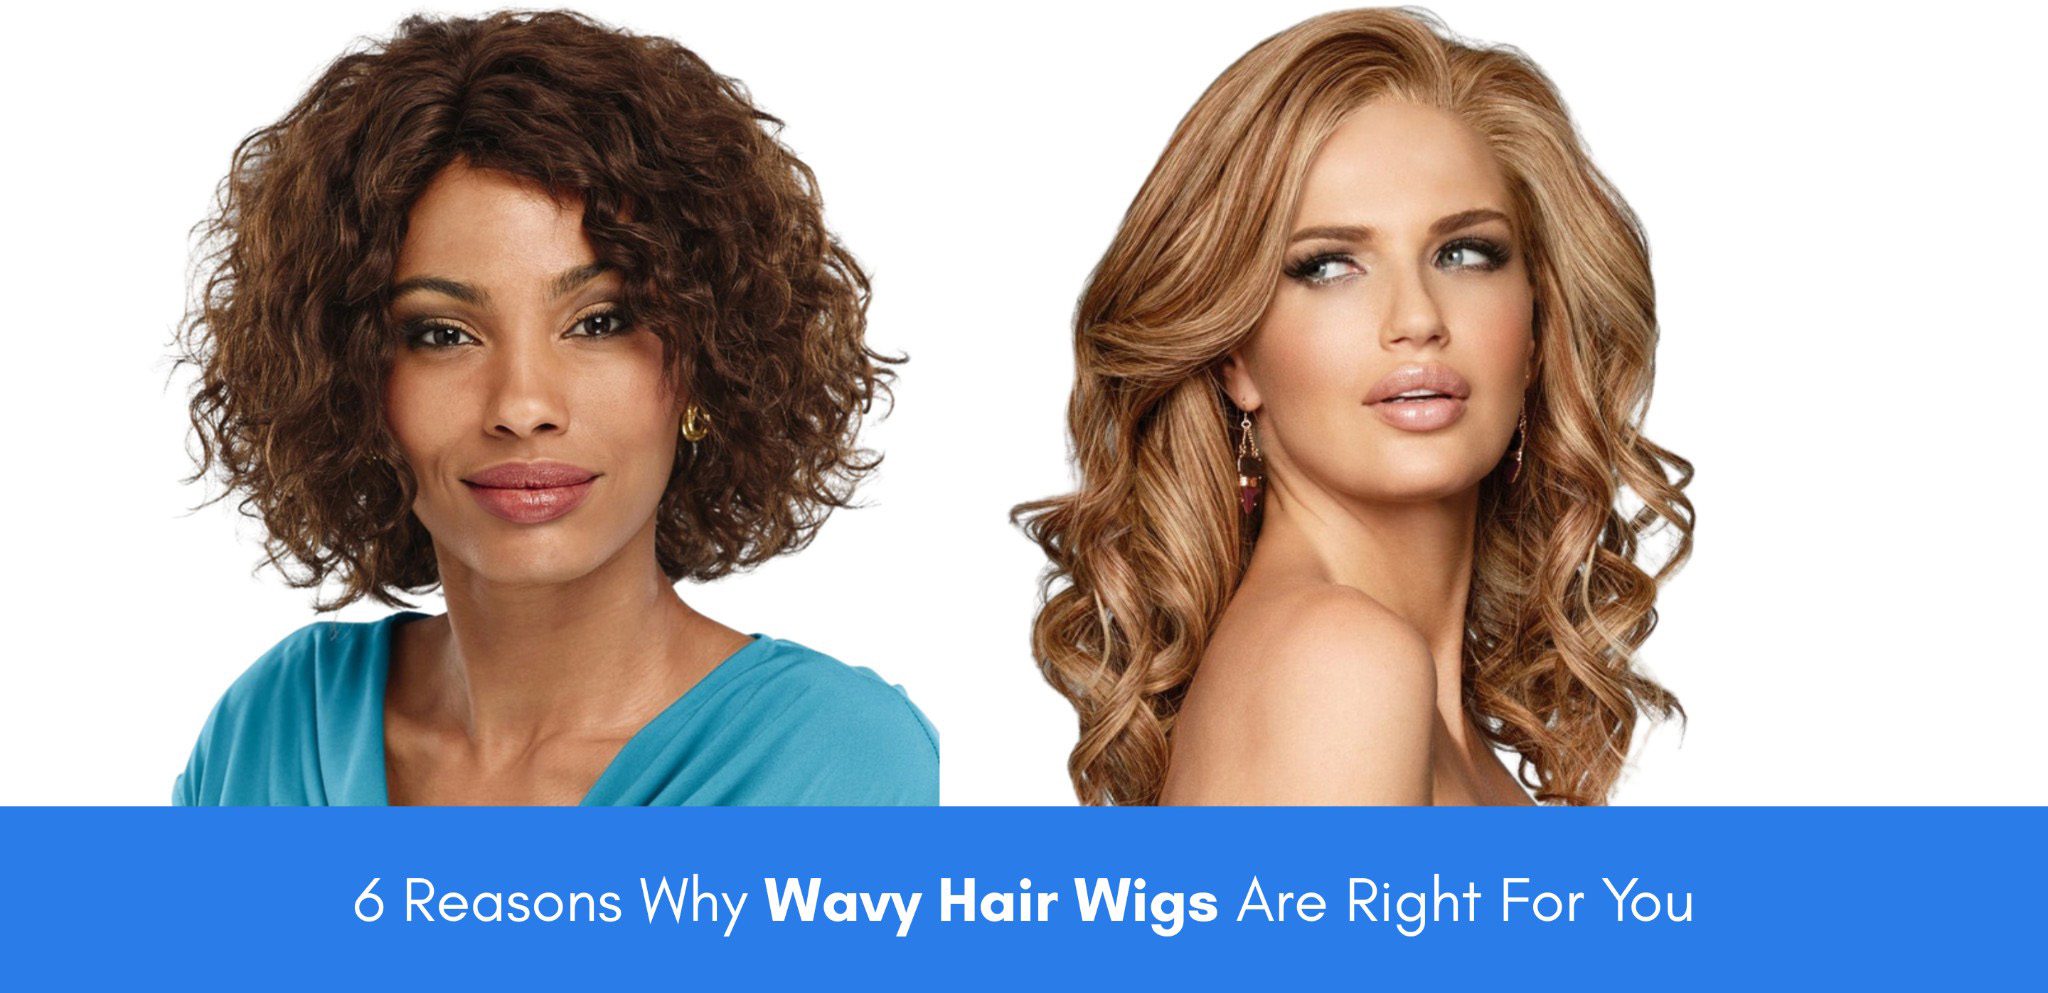 6 Reasons Why Wavy Hair Wigs Are Right For You